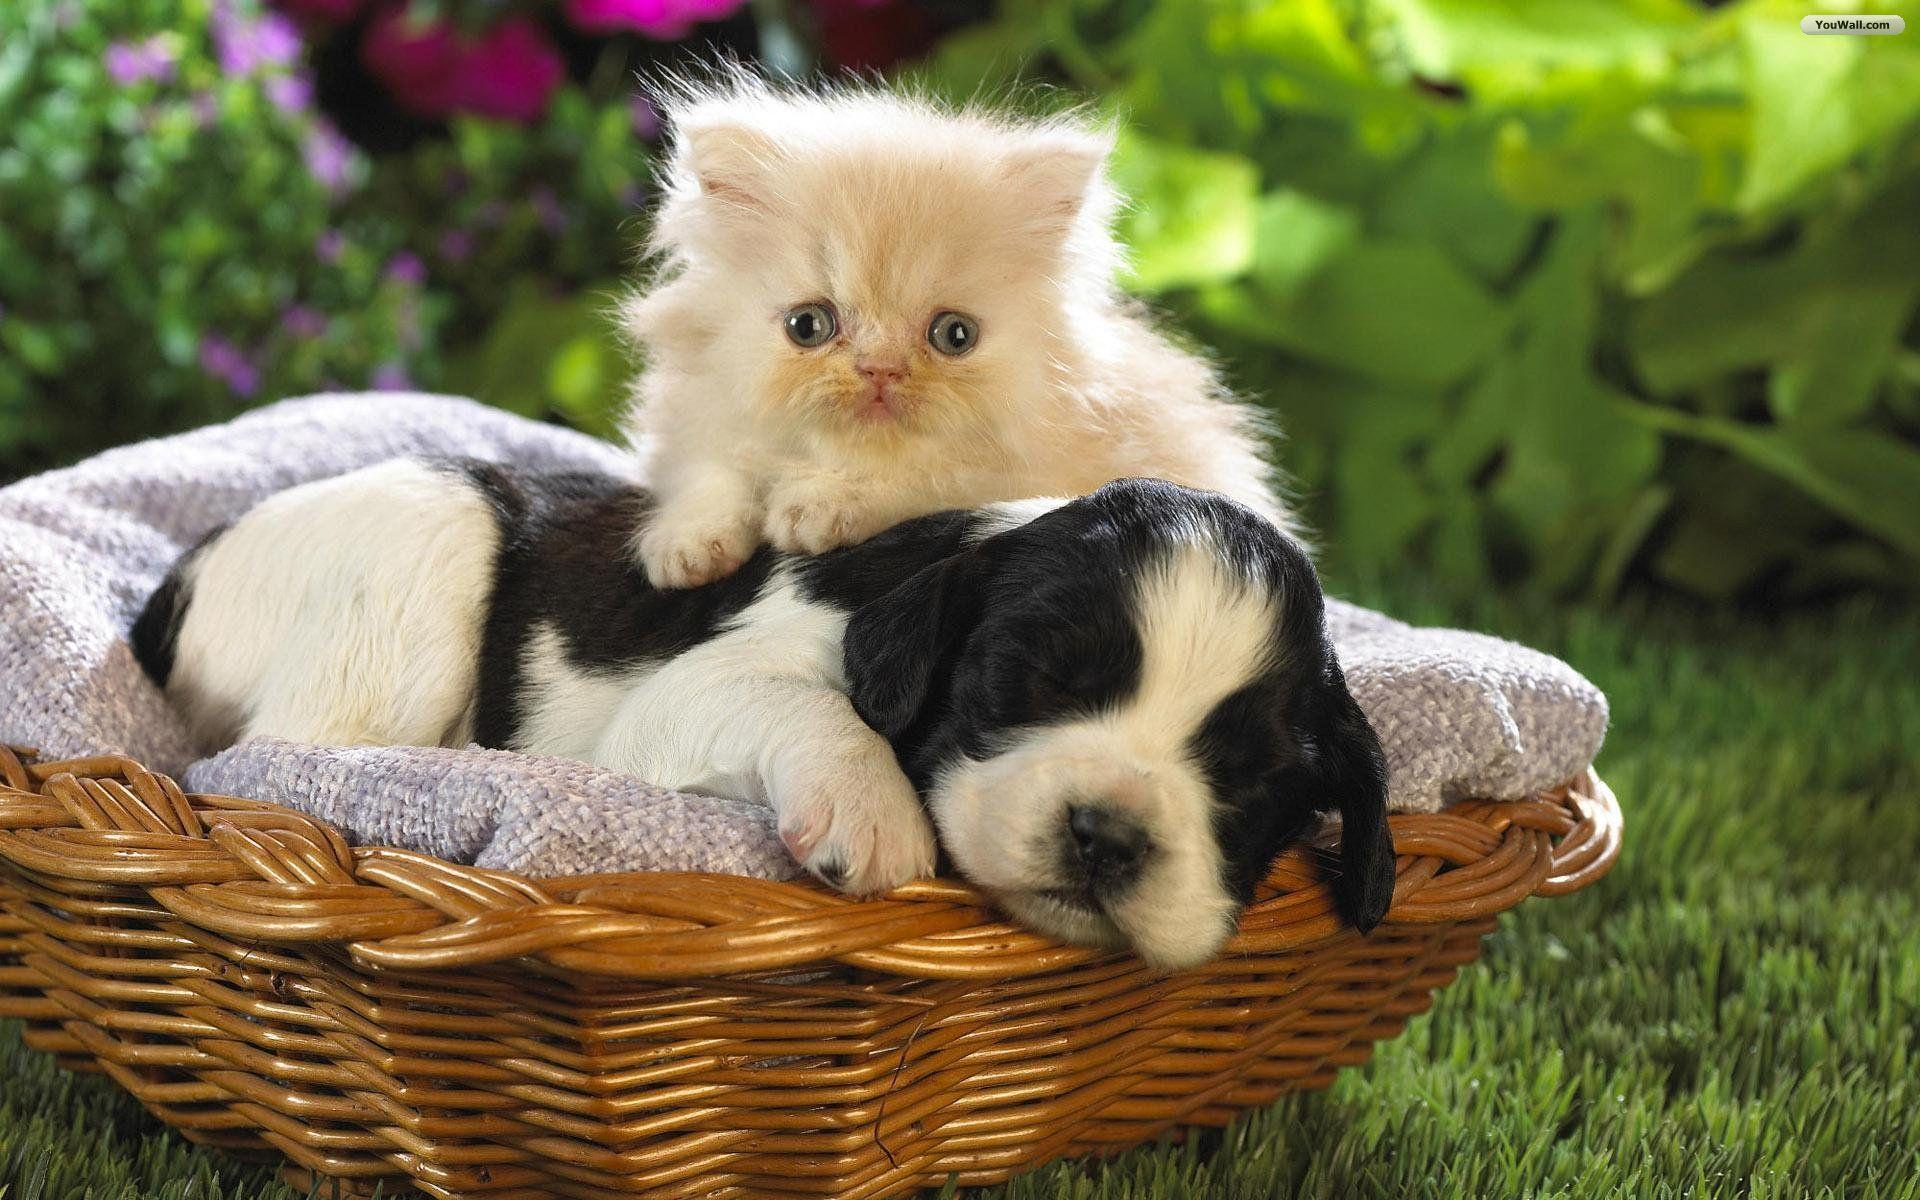 Dog And Cat 115 HD Wallpaper Picture. Top Wallpaper Gallery Photo